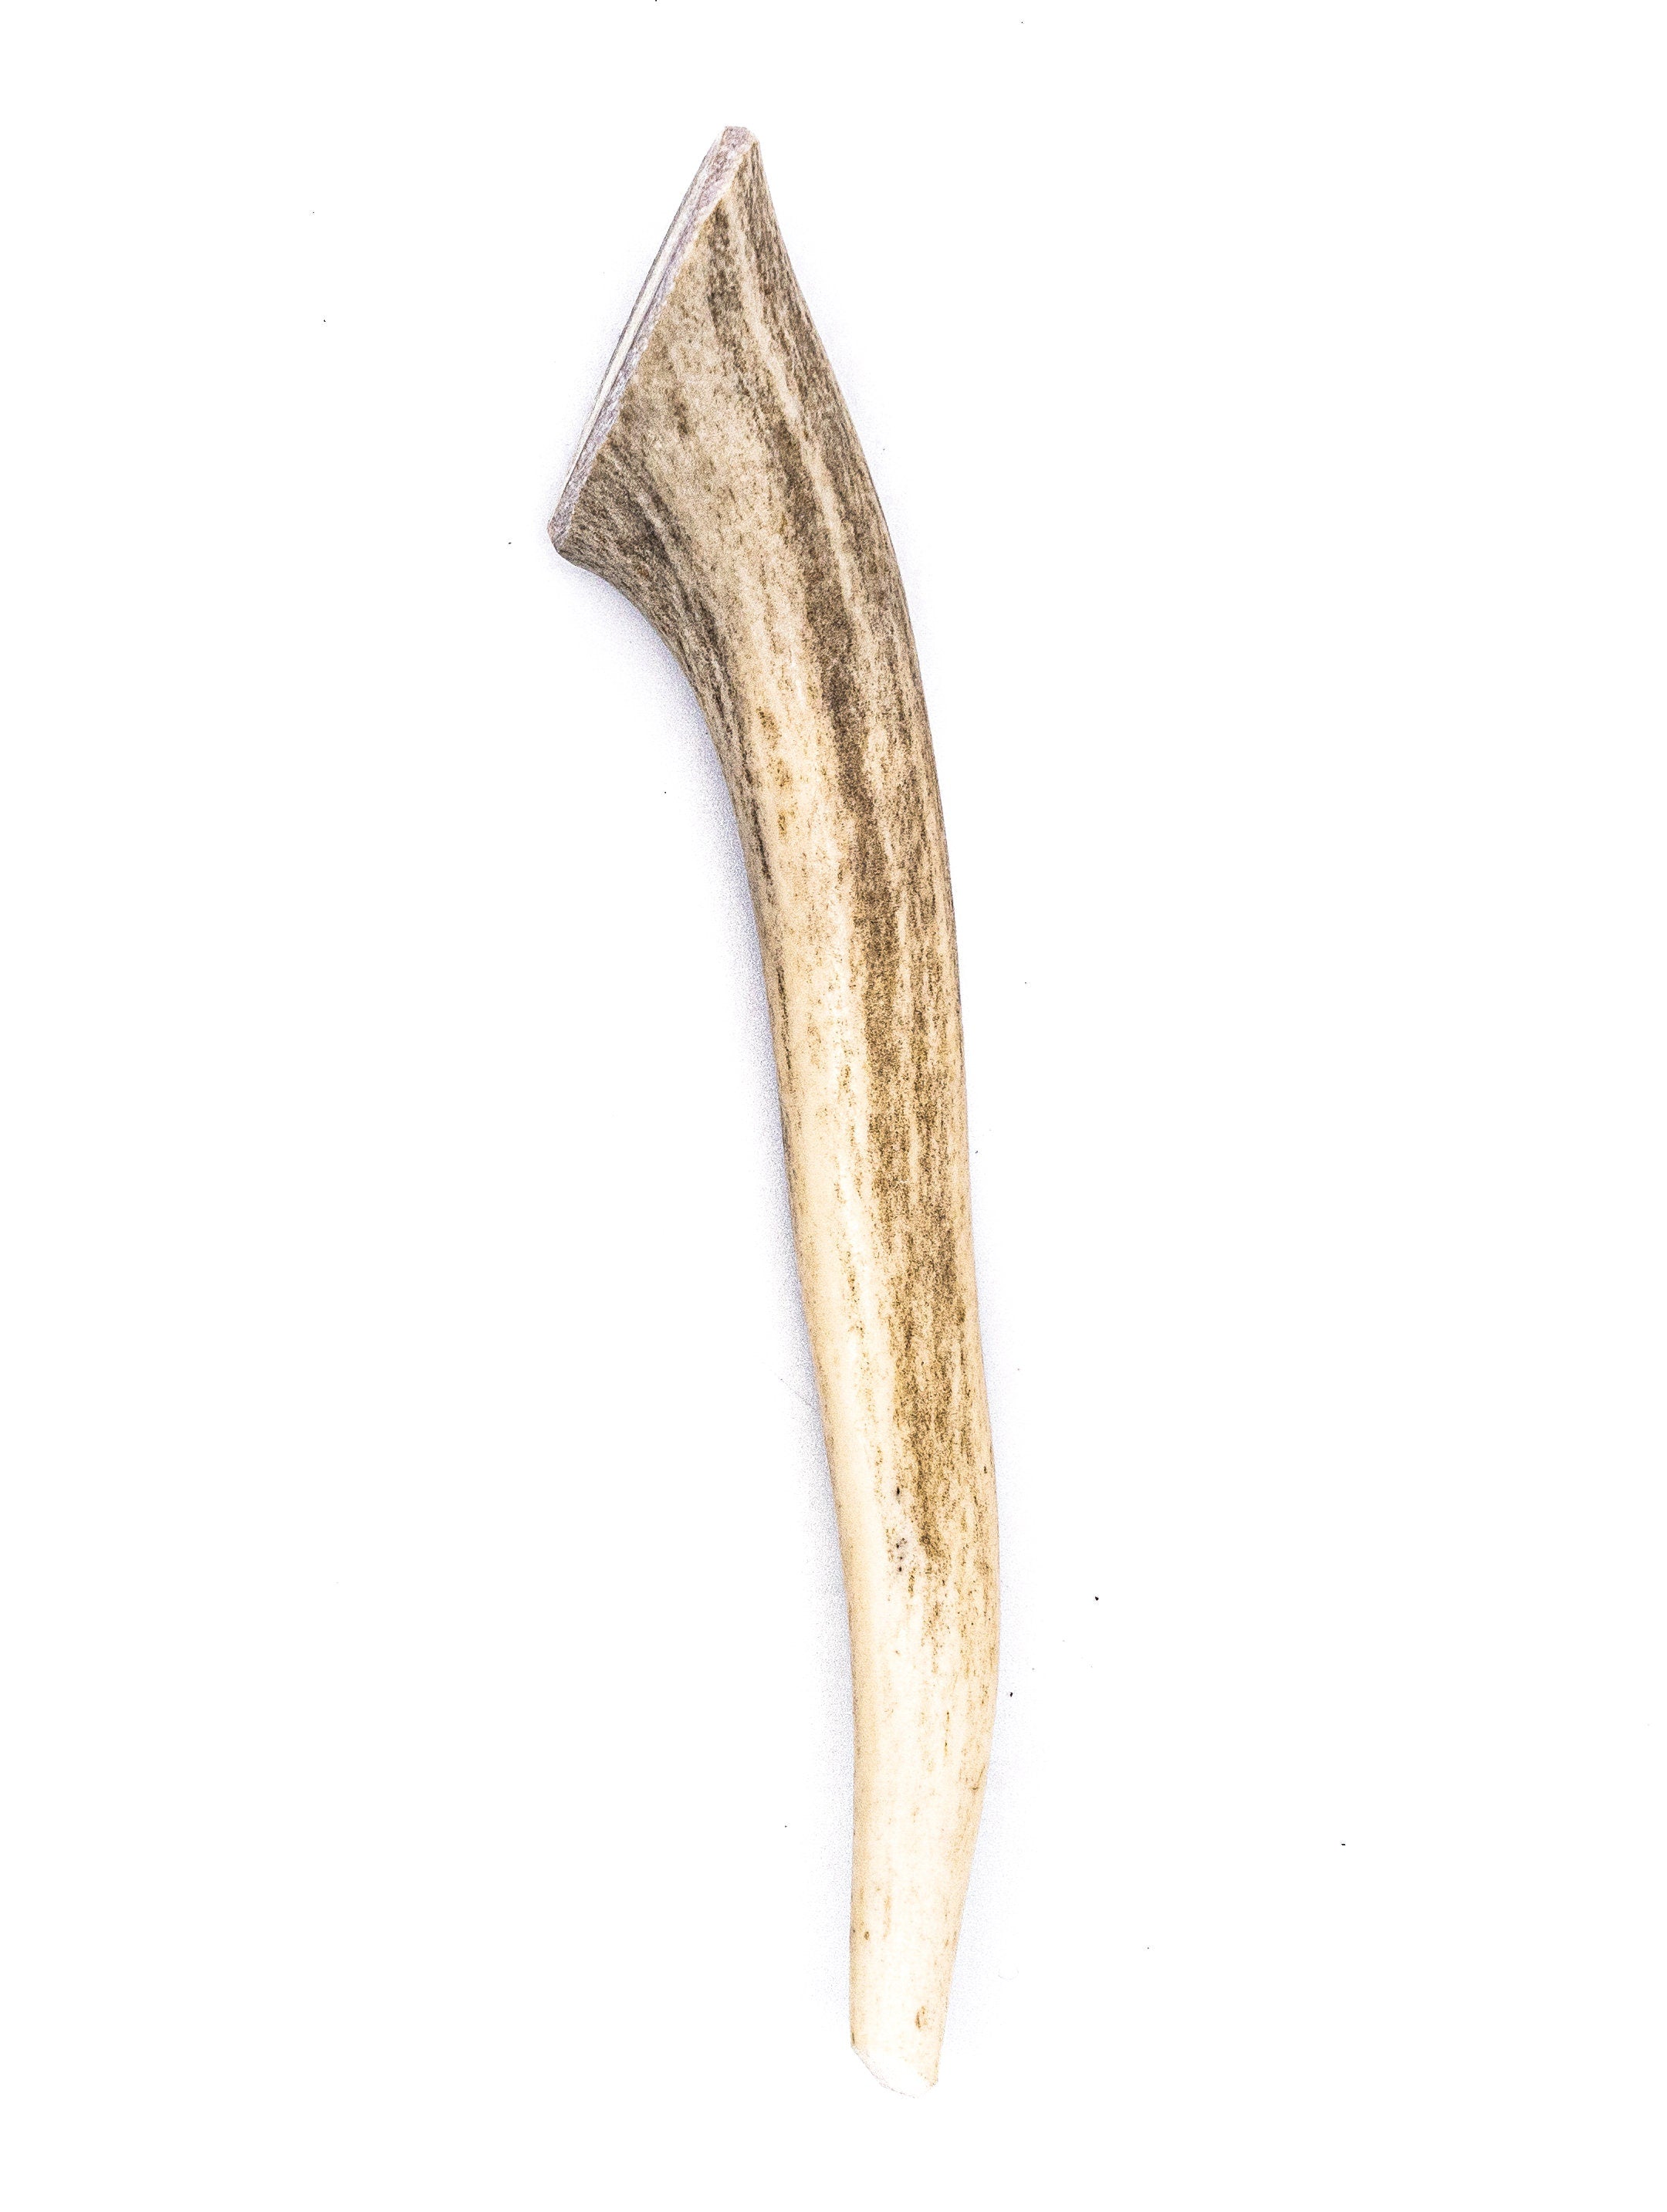 Sustainability of Antlers – Antler Chew